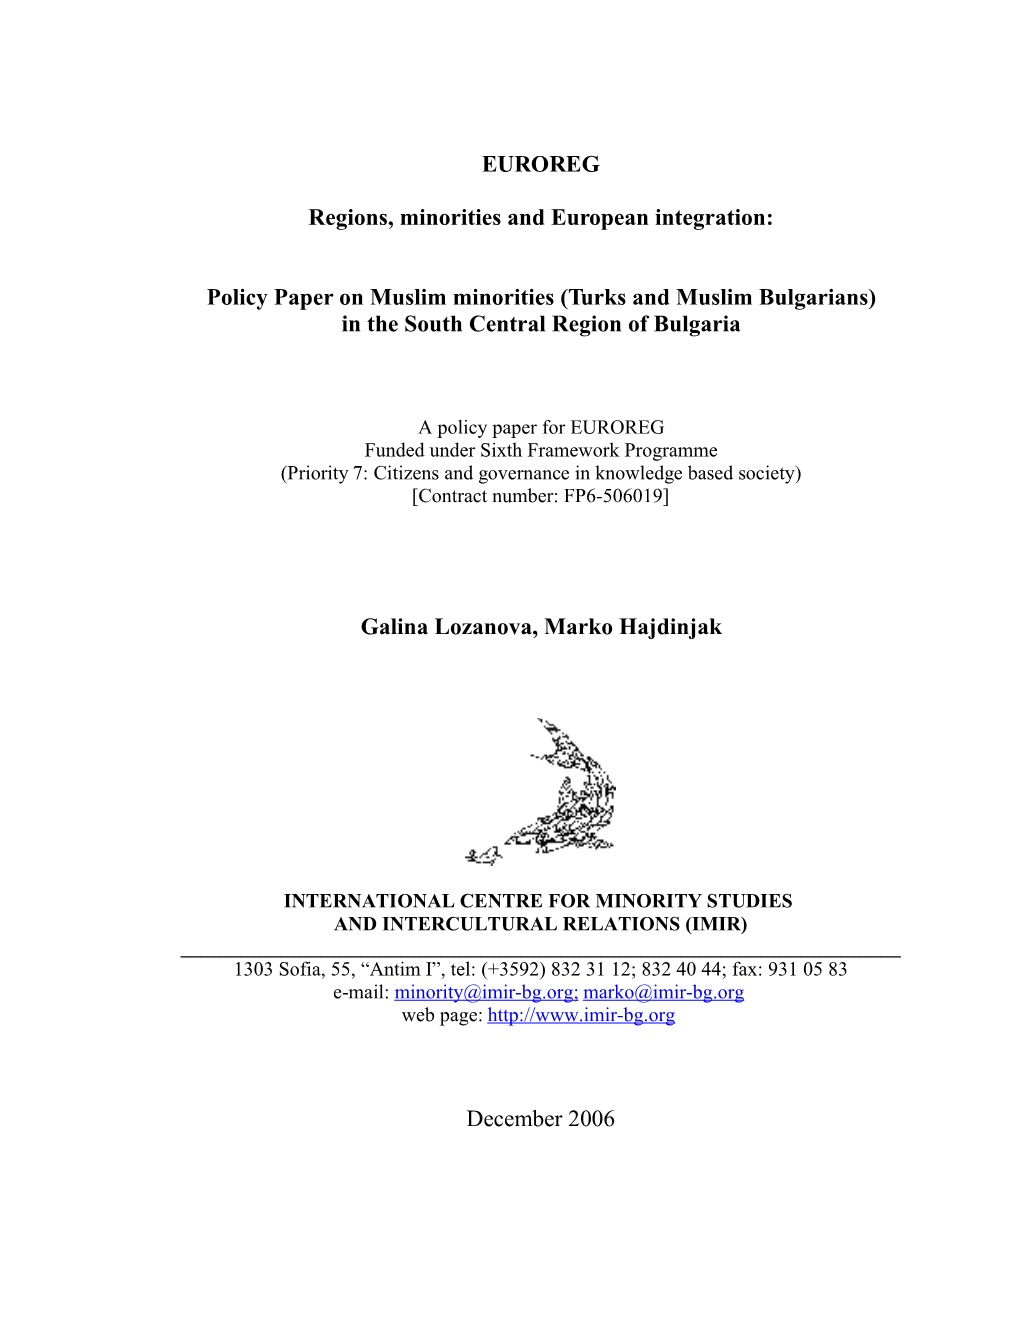 Policy Paper on Muslim Minorities (Turks and Muslim Bulgarians) in the South Central Region of Bulgaria